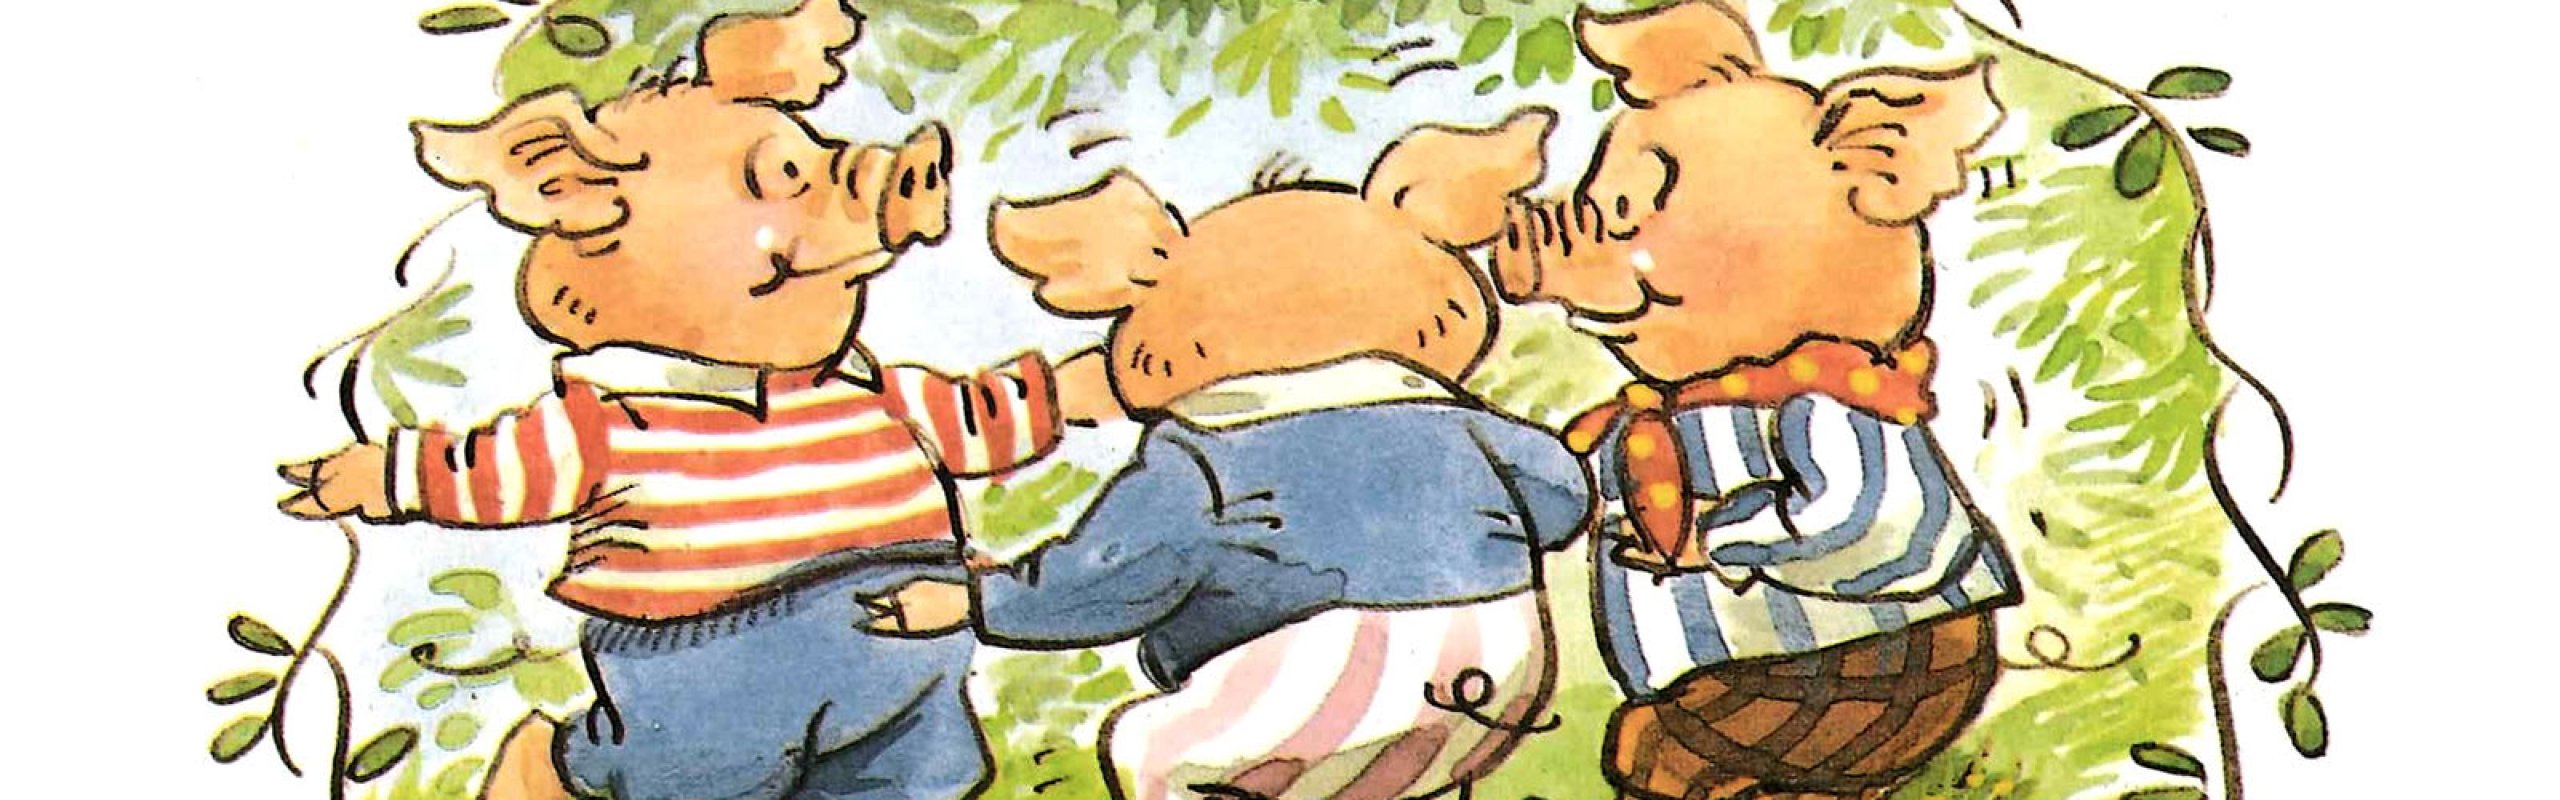 It's Storytime! The Three Little Pigs